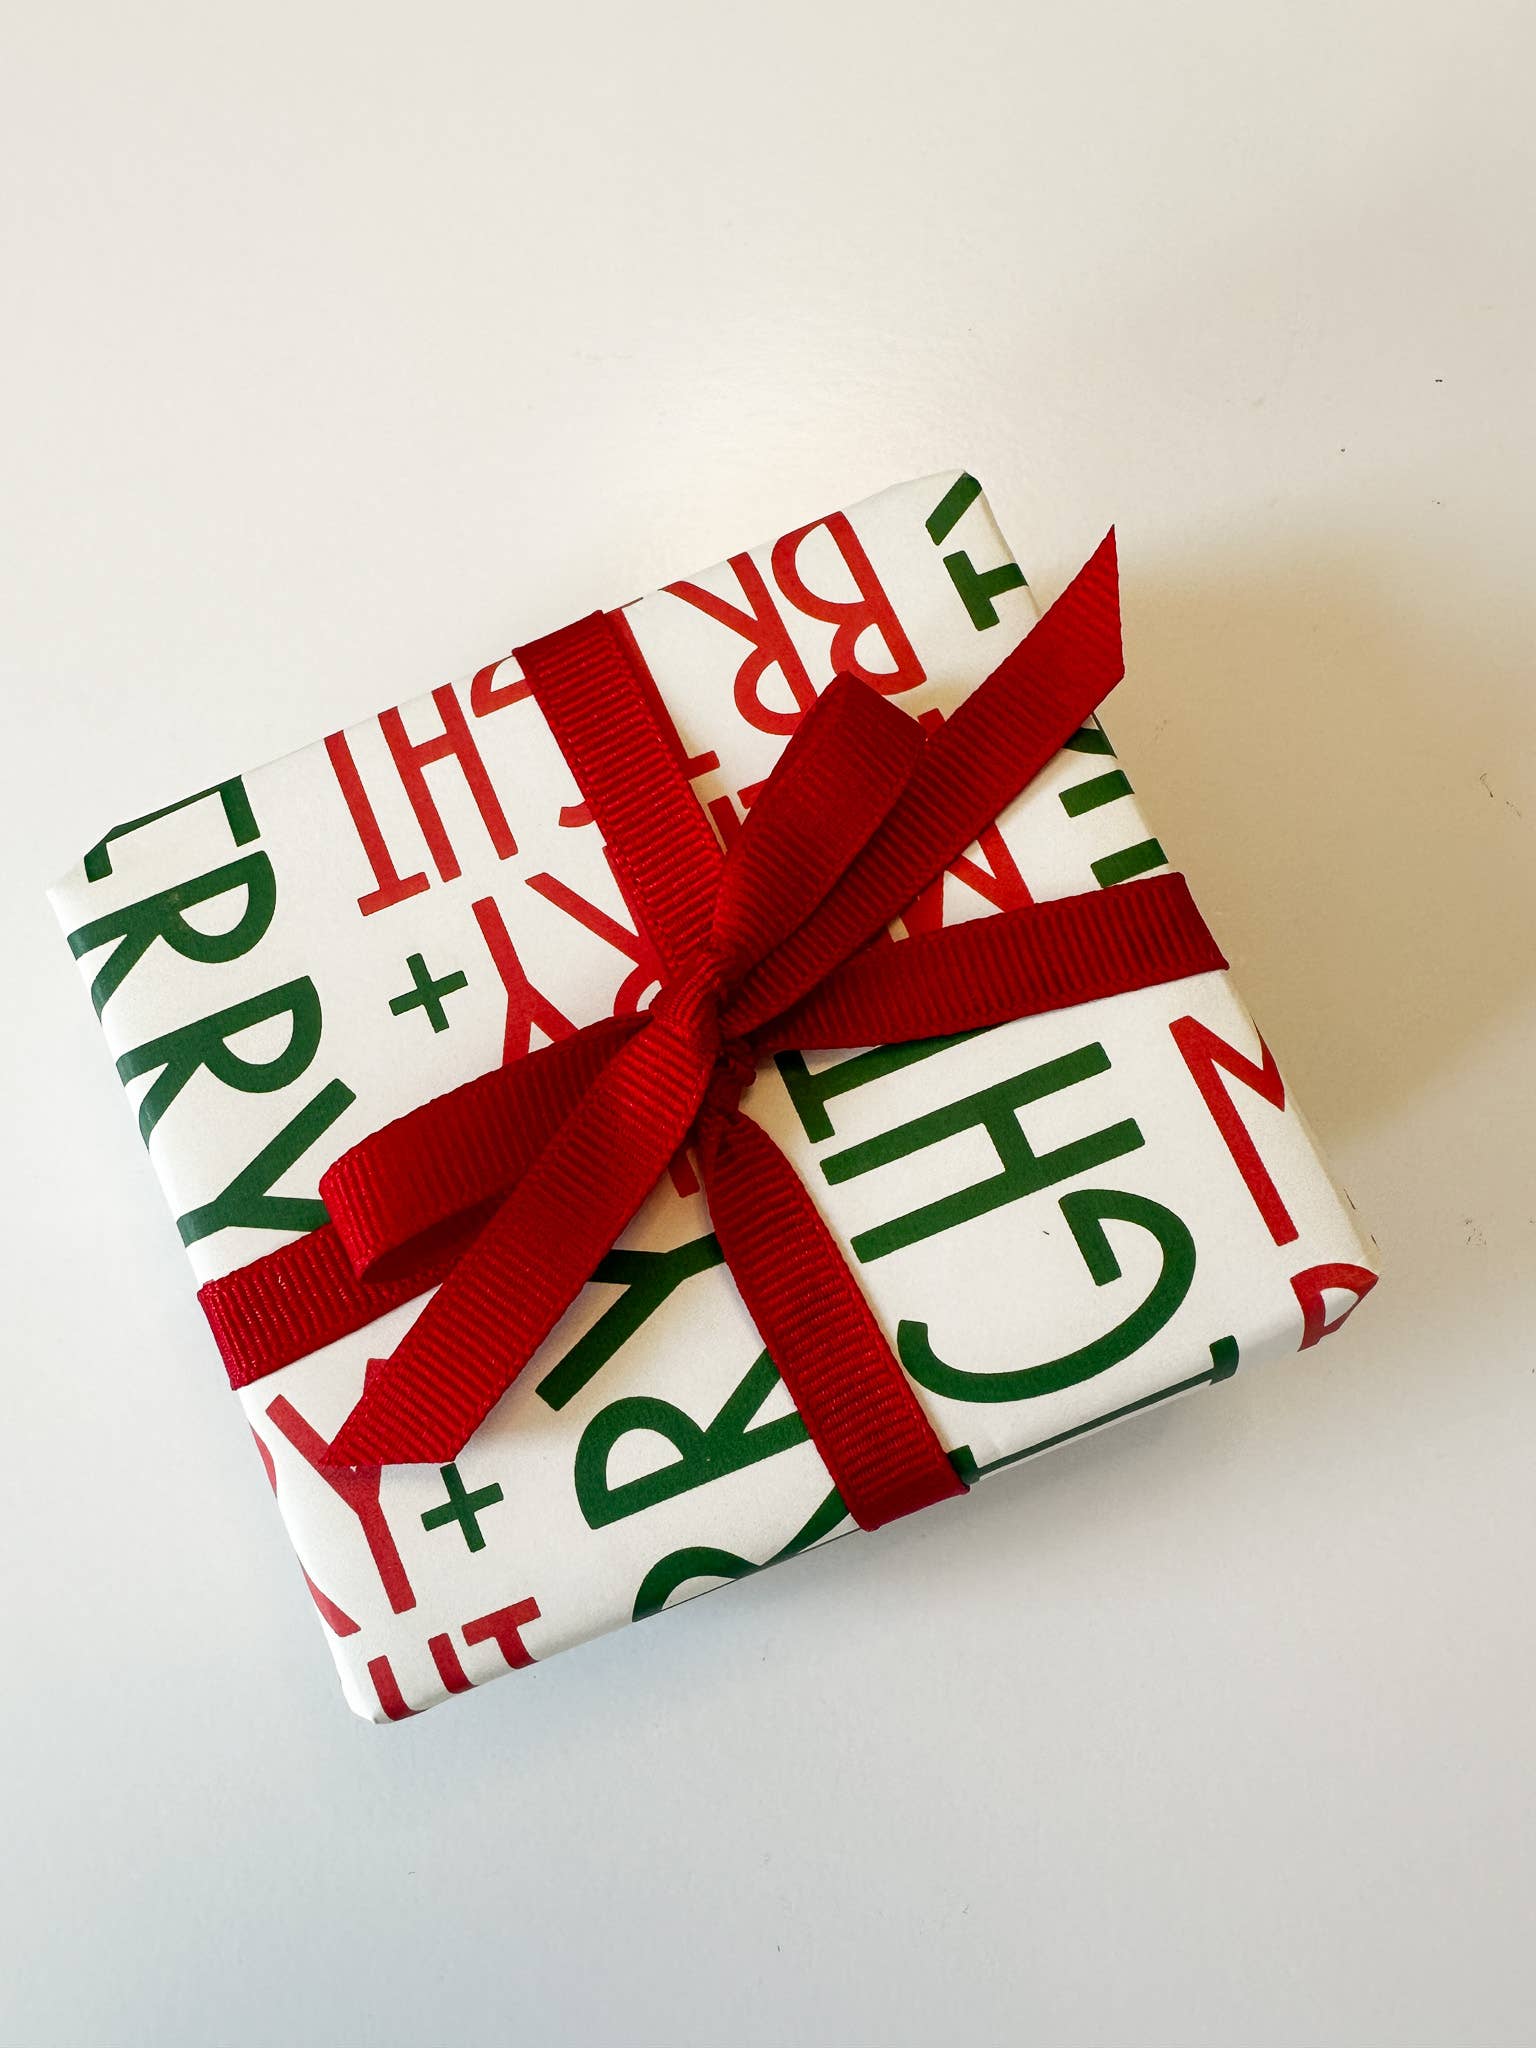 Merry + Bright Wrapping Paper